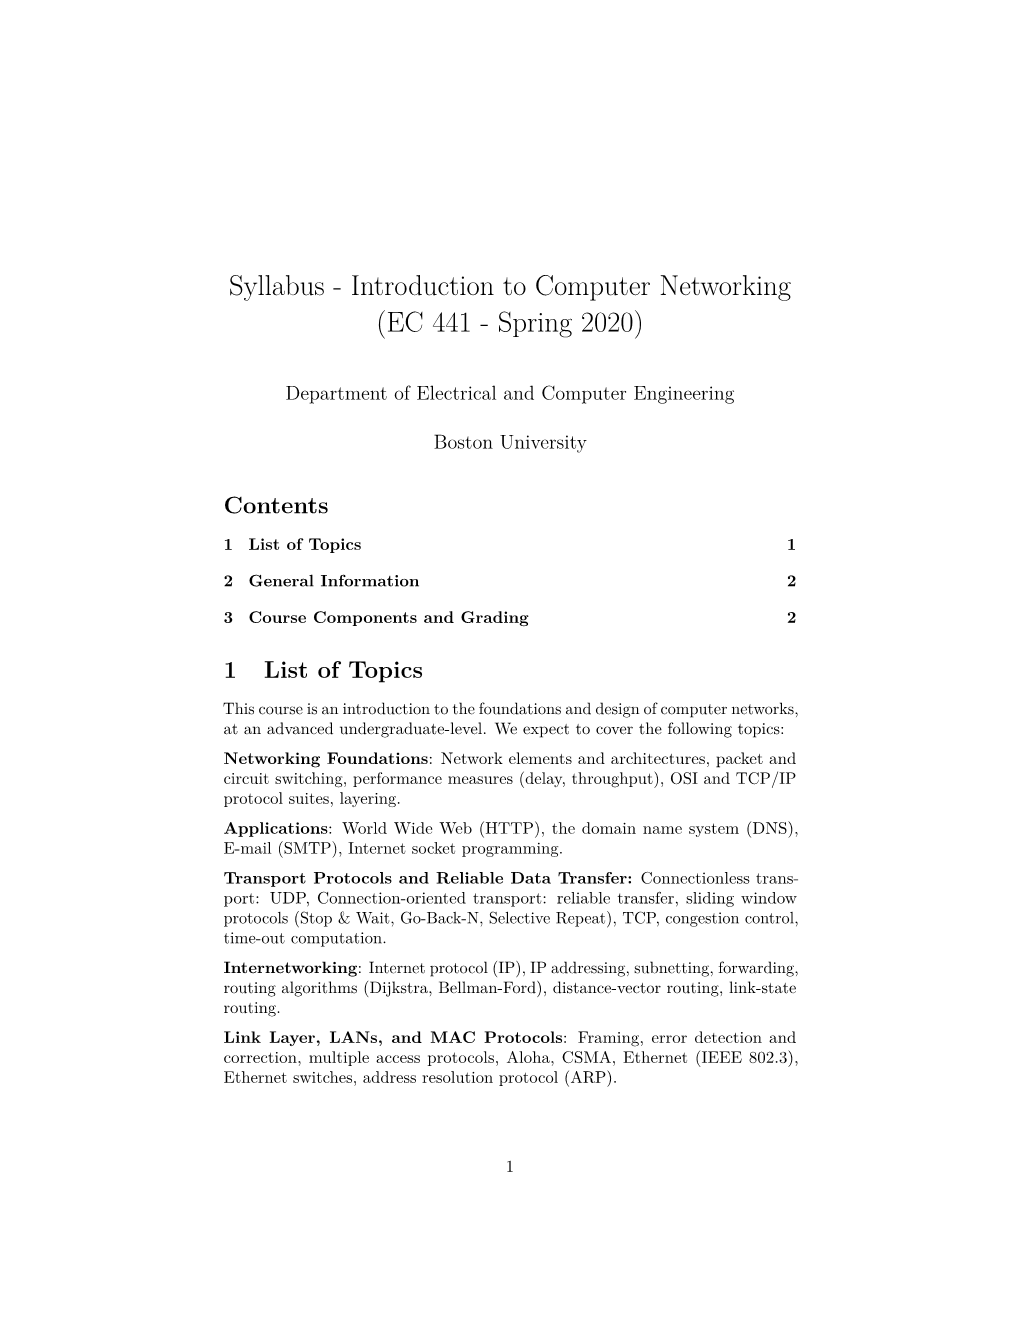 Syllabus - Introduction to Computer Networking (EC 441 - Spring 2020)